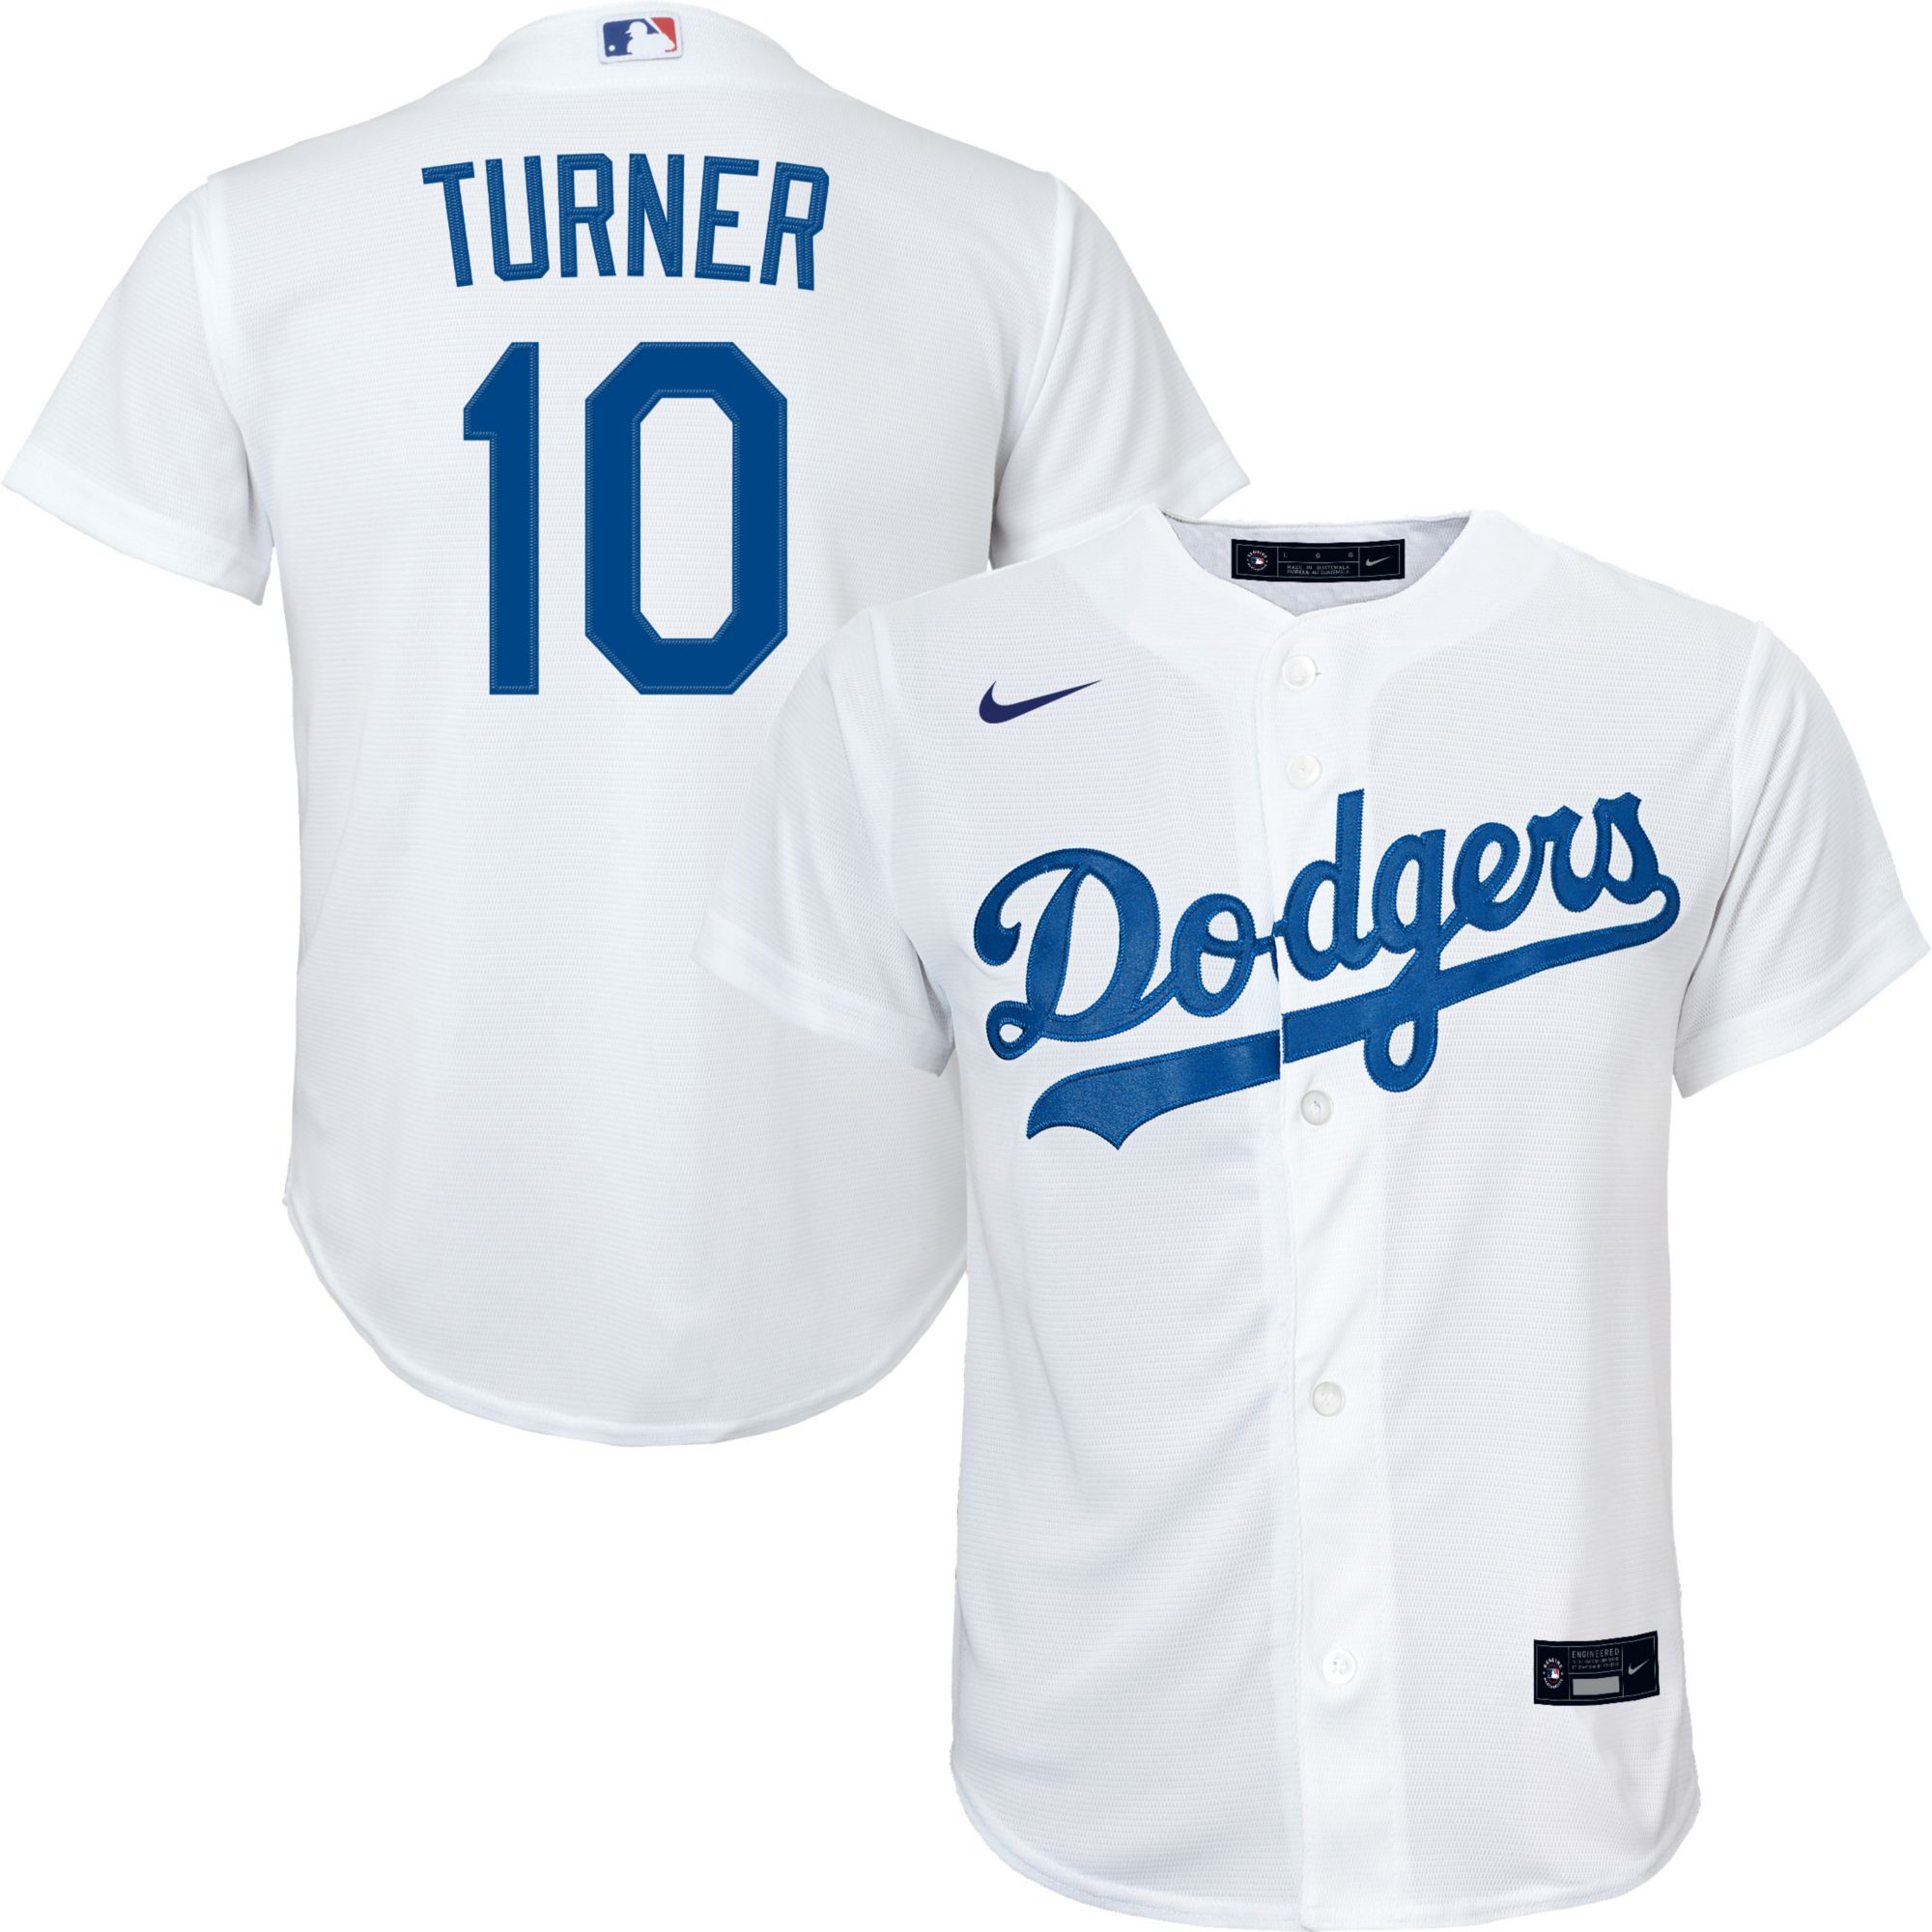 justin turner jersey youth